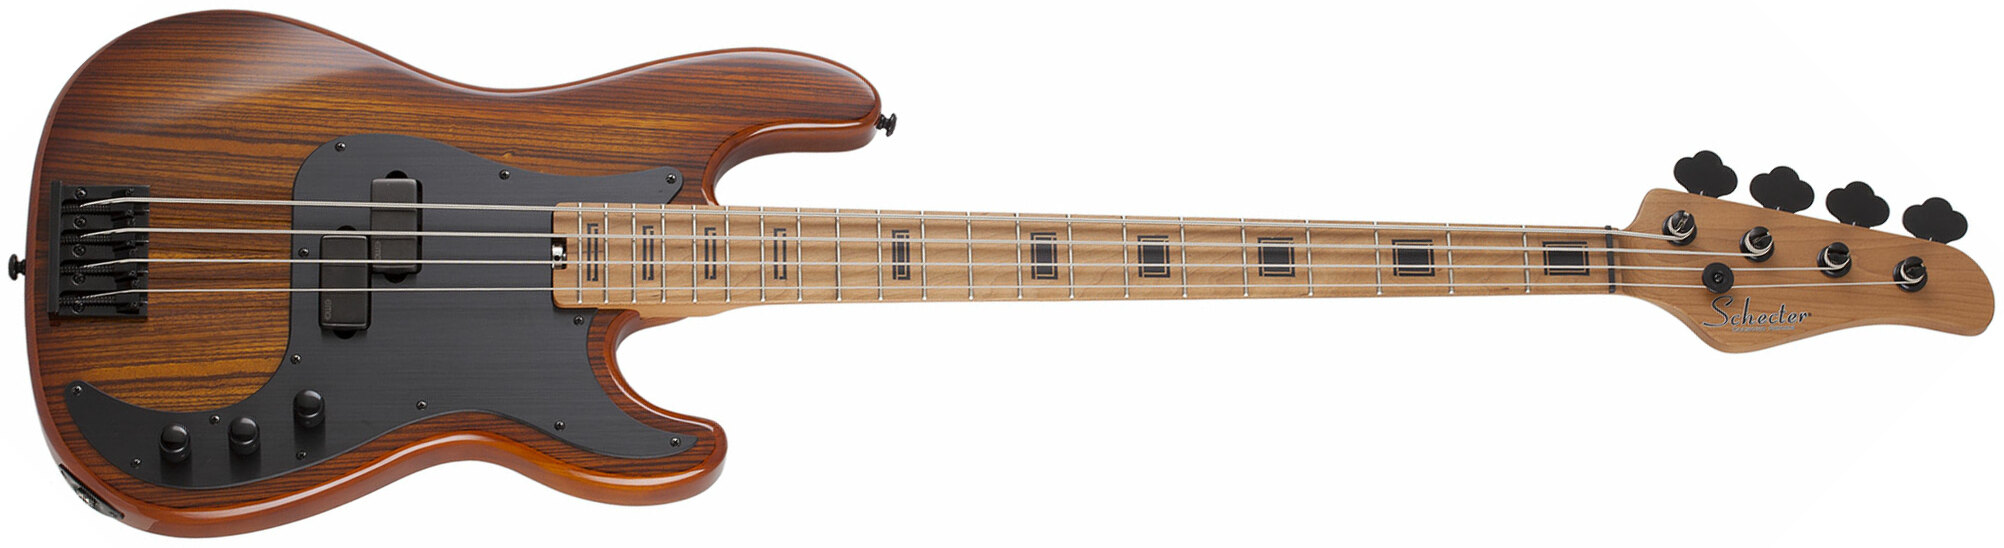 Schecter P-4 Exotic Active Emg Mn - Faded Vintage Sunburst - Solid body electric bass - Main picture